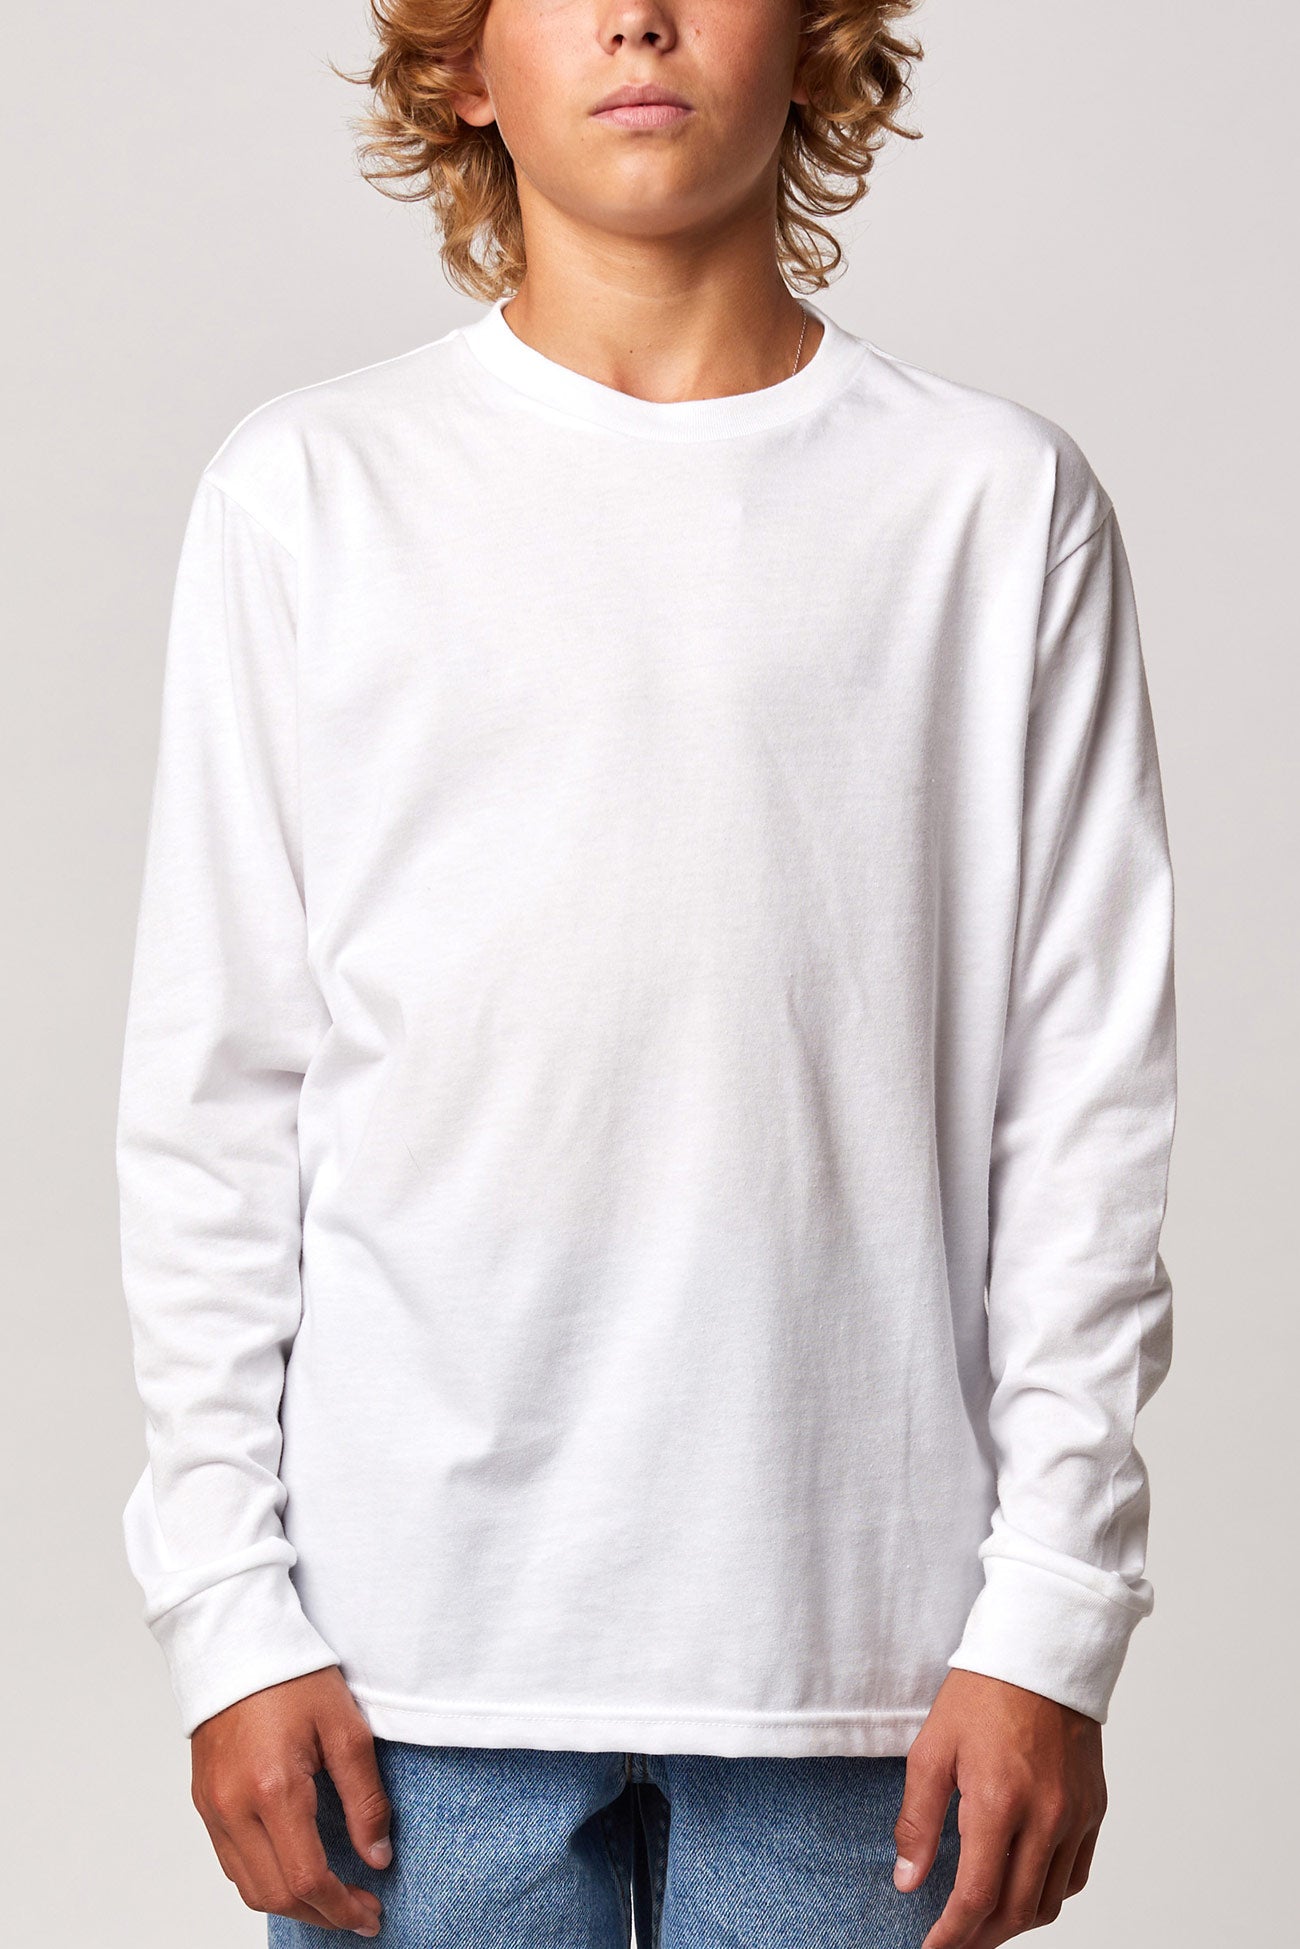 #SY4150LS Recycled - Long Sleeve Crew - Youth